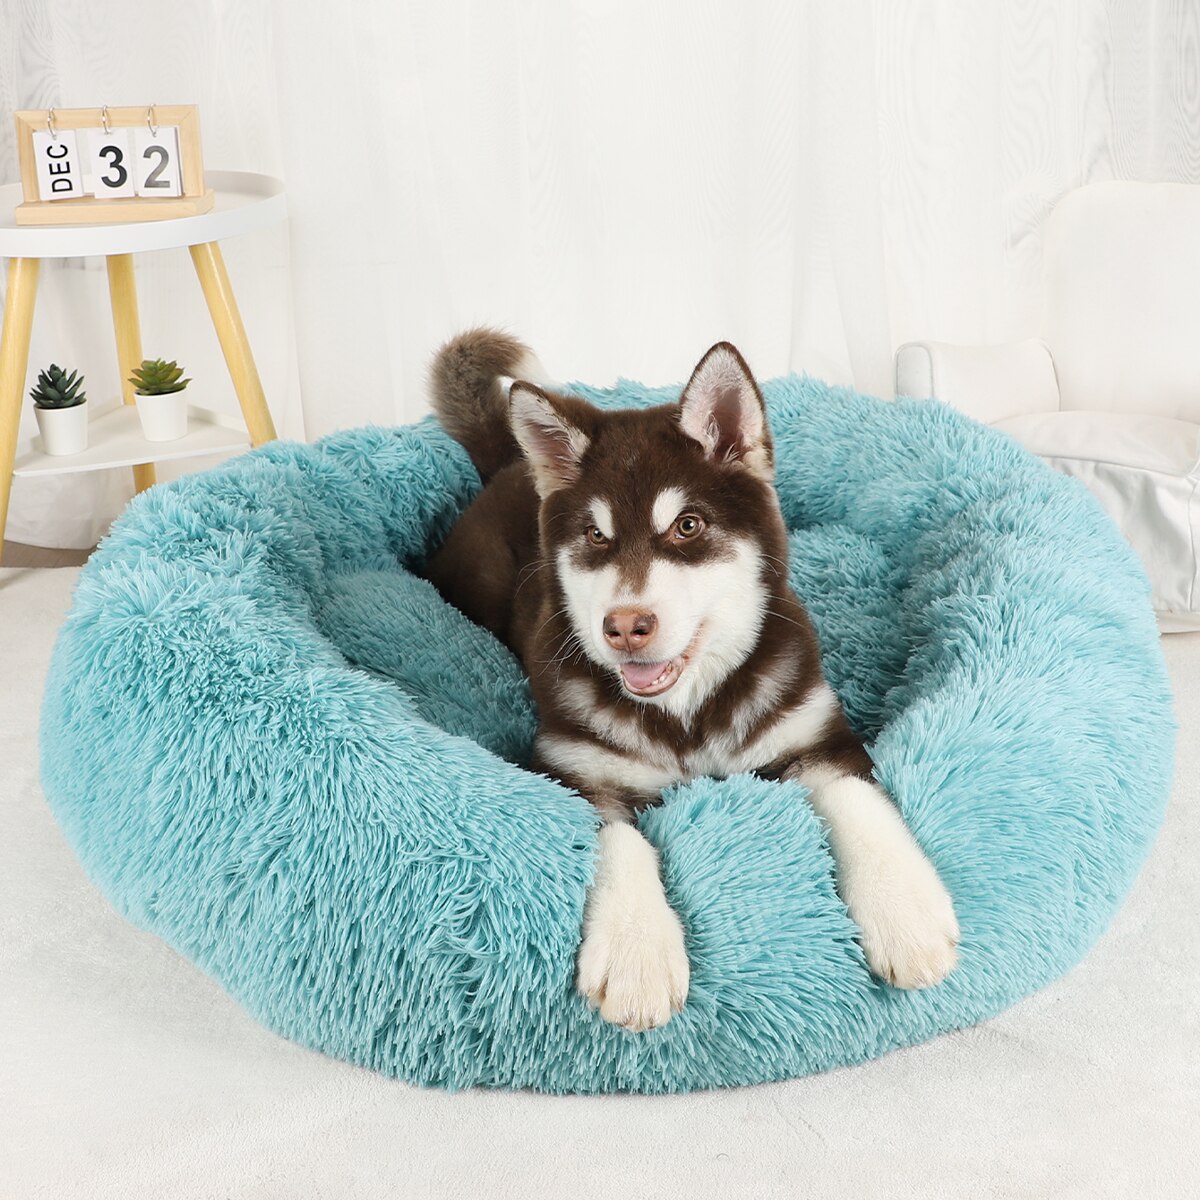 Plush Dog Bed Large Beds for Dogs Washable Medium Small Basket Accessorys Pet Furniture Fluffy Sofa Puppy Kennel Accessories Mat